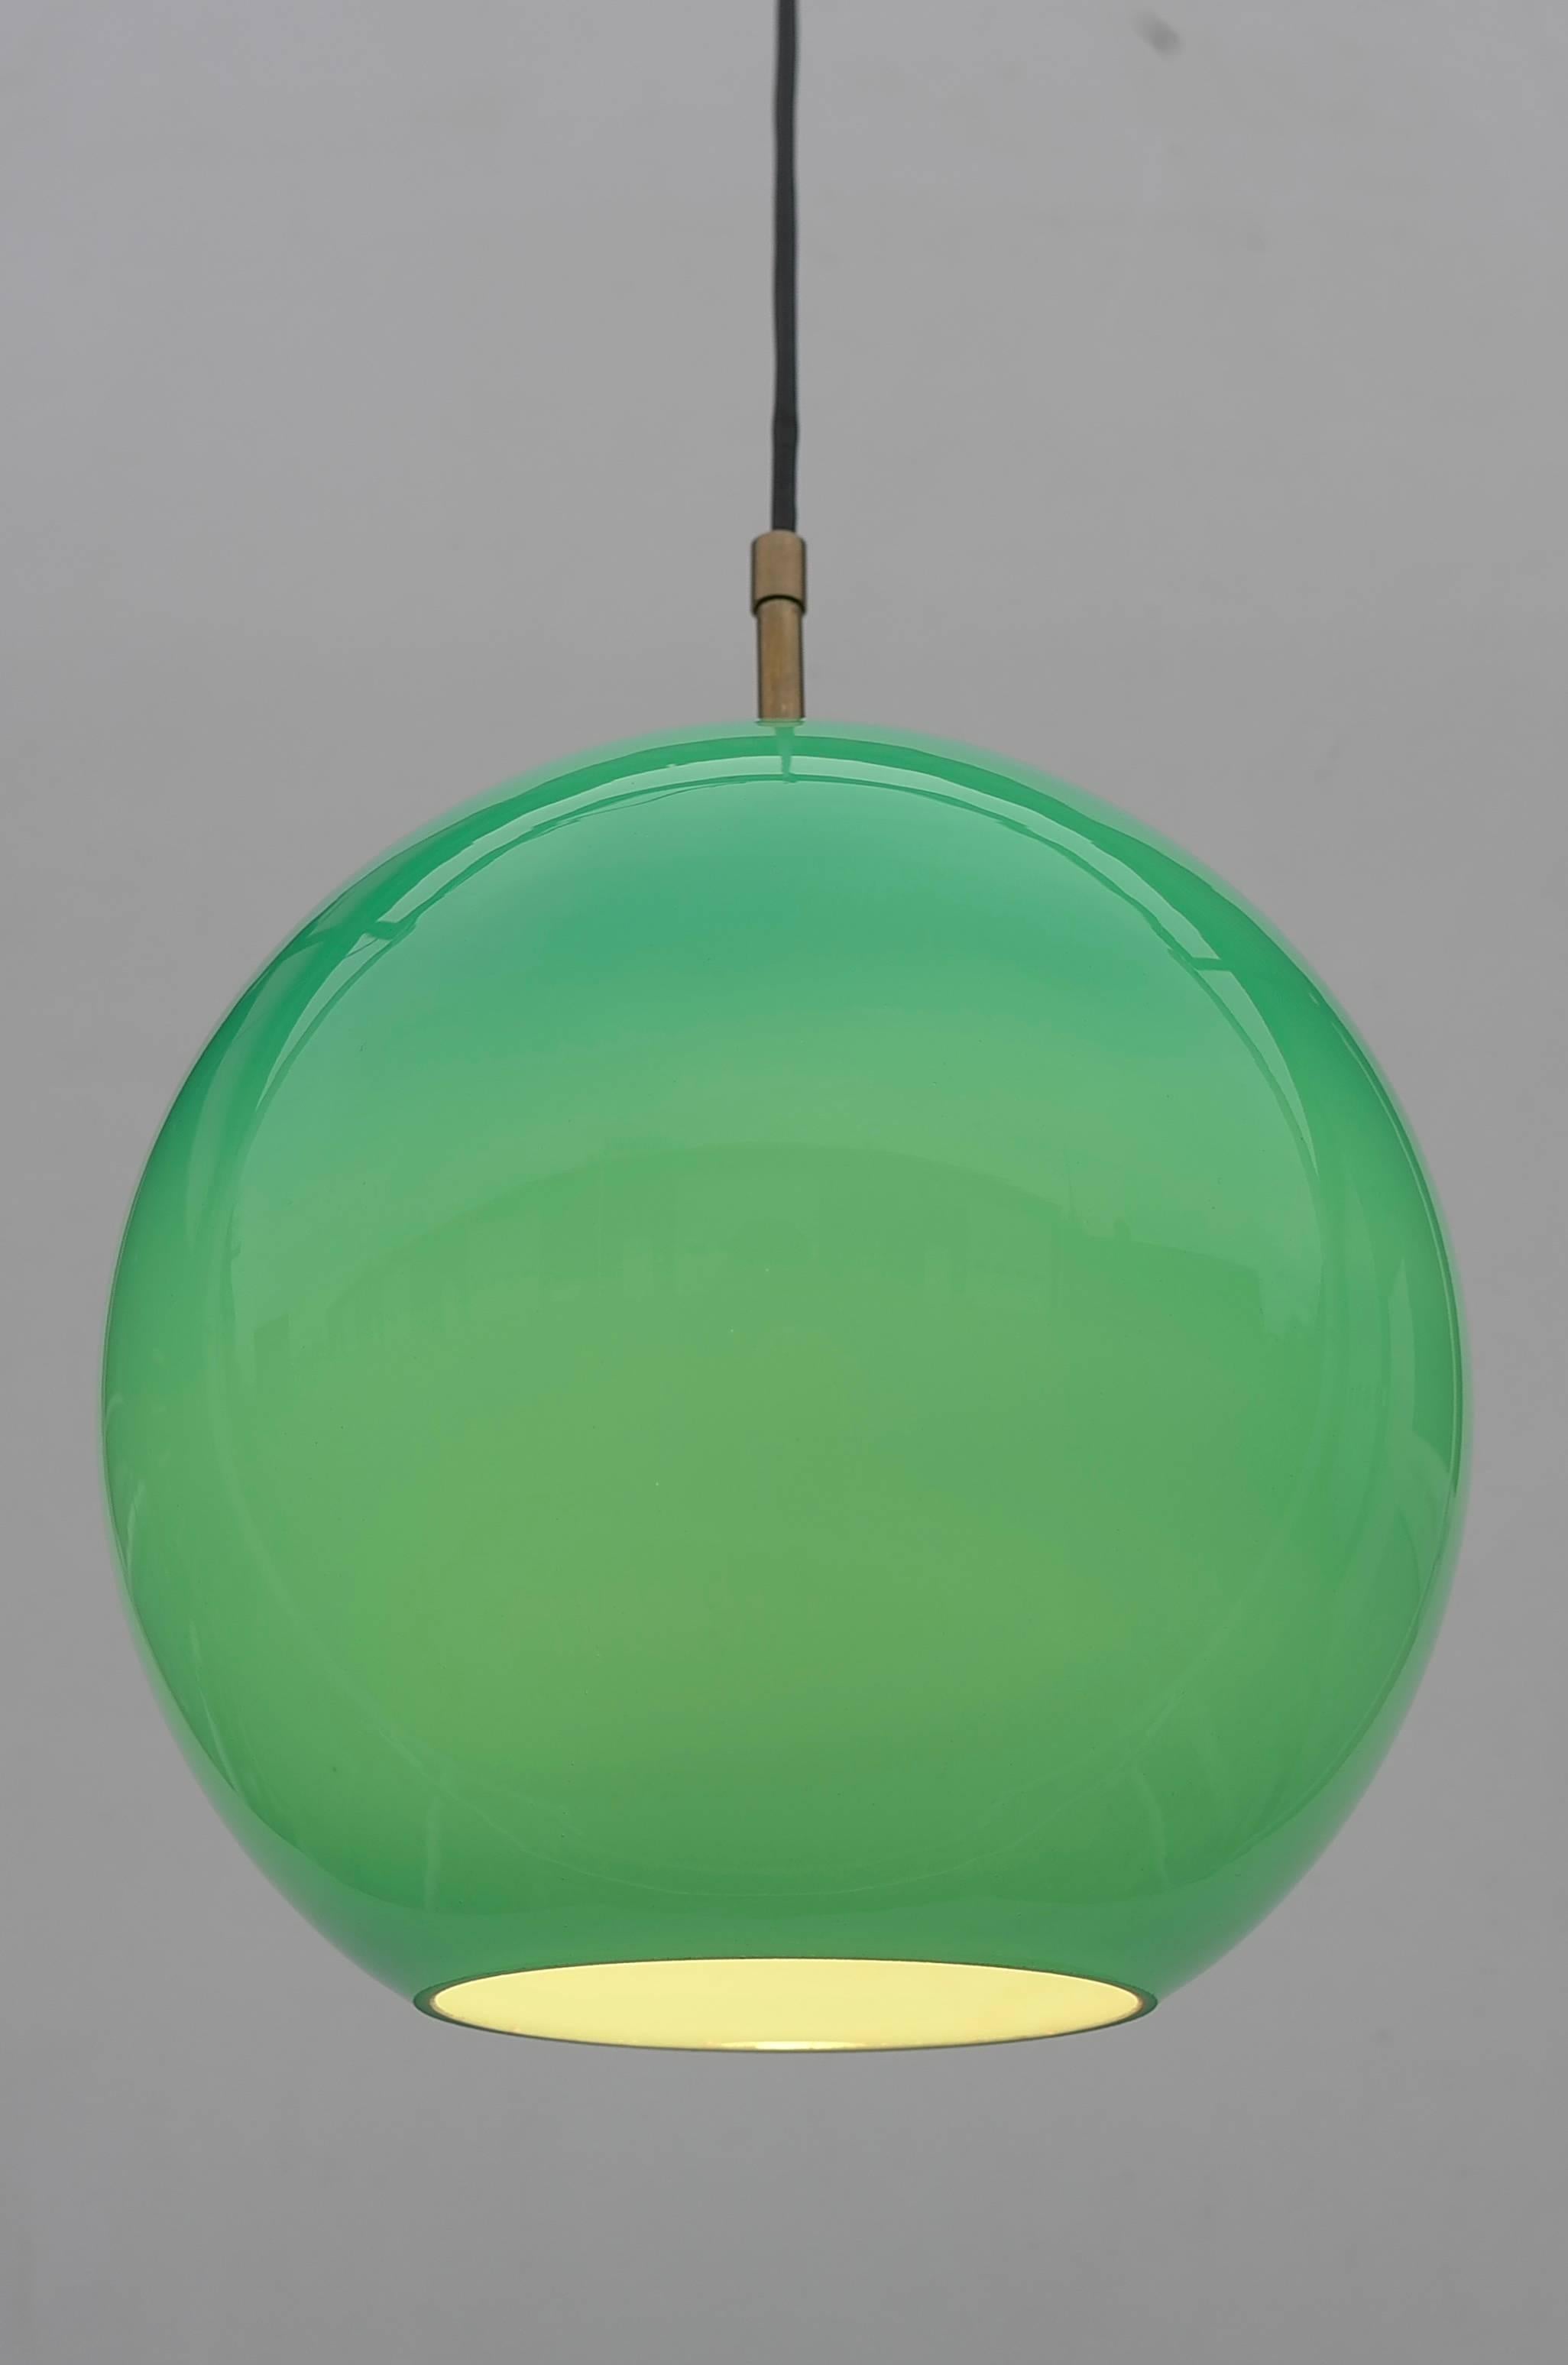 Uno & Östen Kristiansson glass pendant lamp in Jade color by Luxus in Vittsjö Sweden.


More same lamps are available, ask for availabilty.
